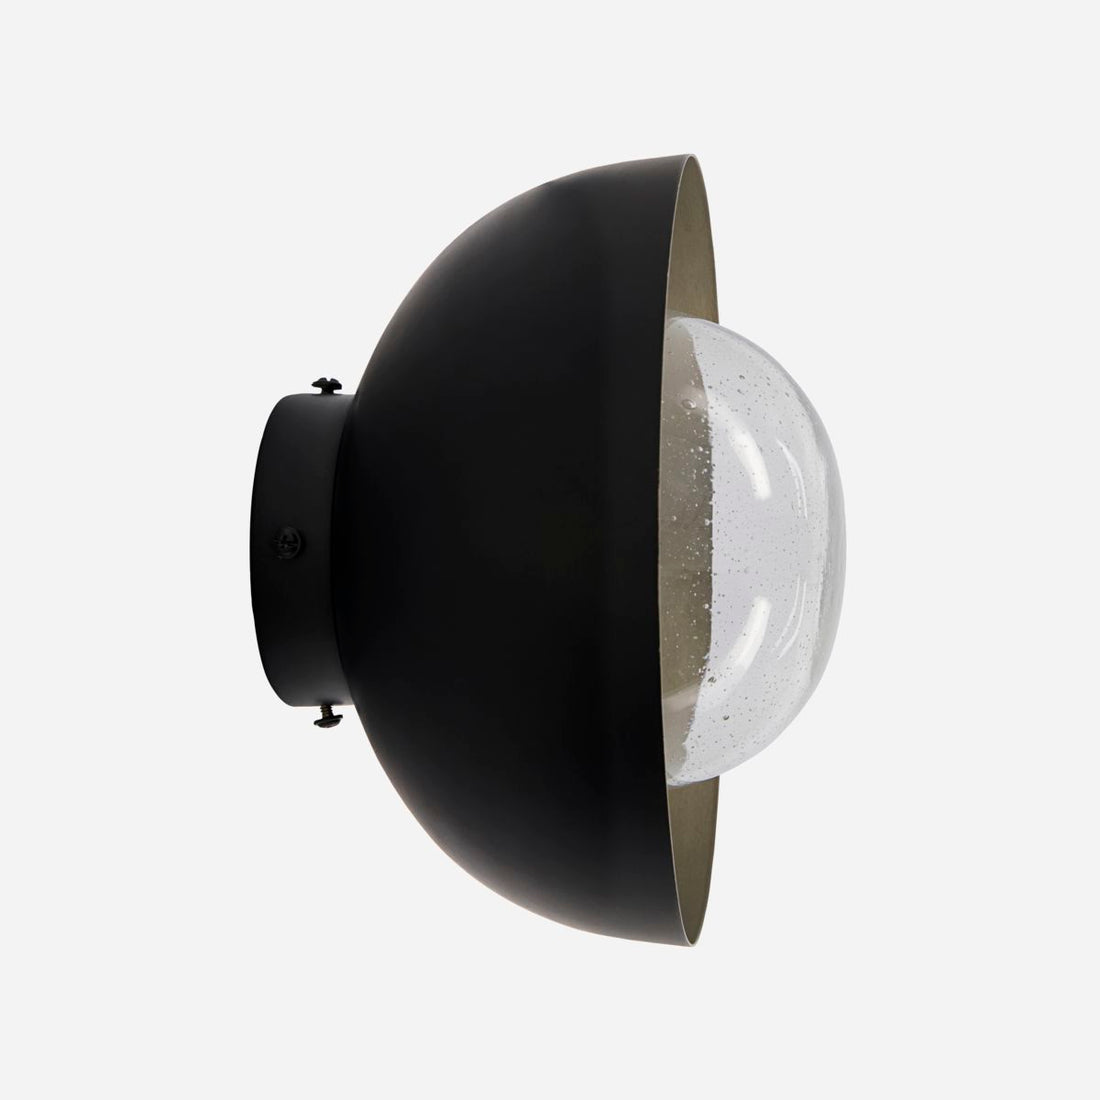 By Nord-Wall Lighting, Middle, Coal-L: 25.4 cm, W: 25.4 cm, H: 13.3 cm